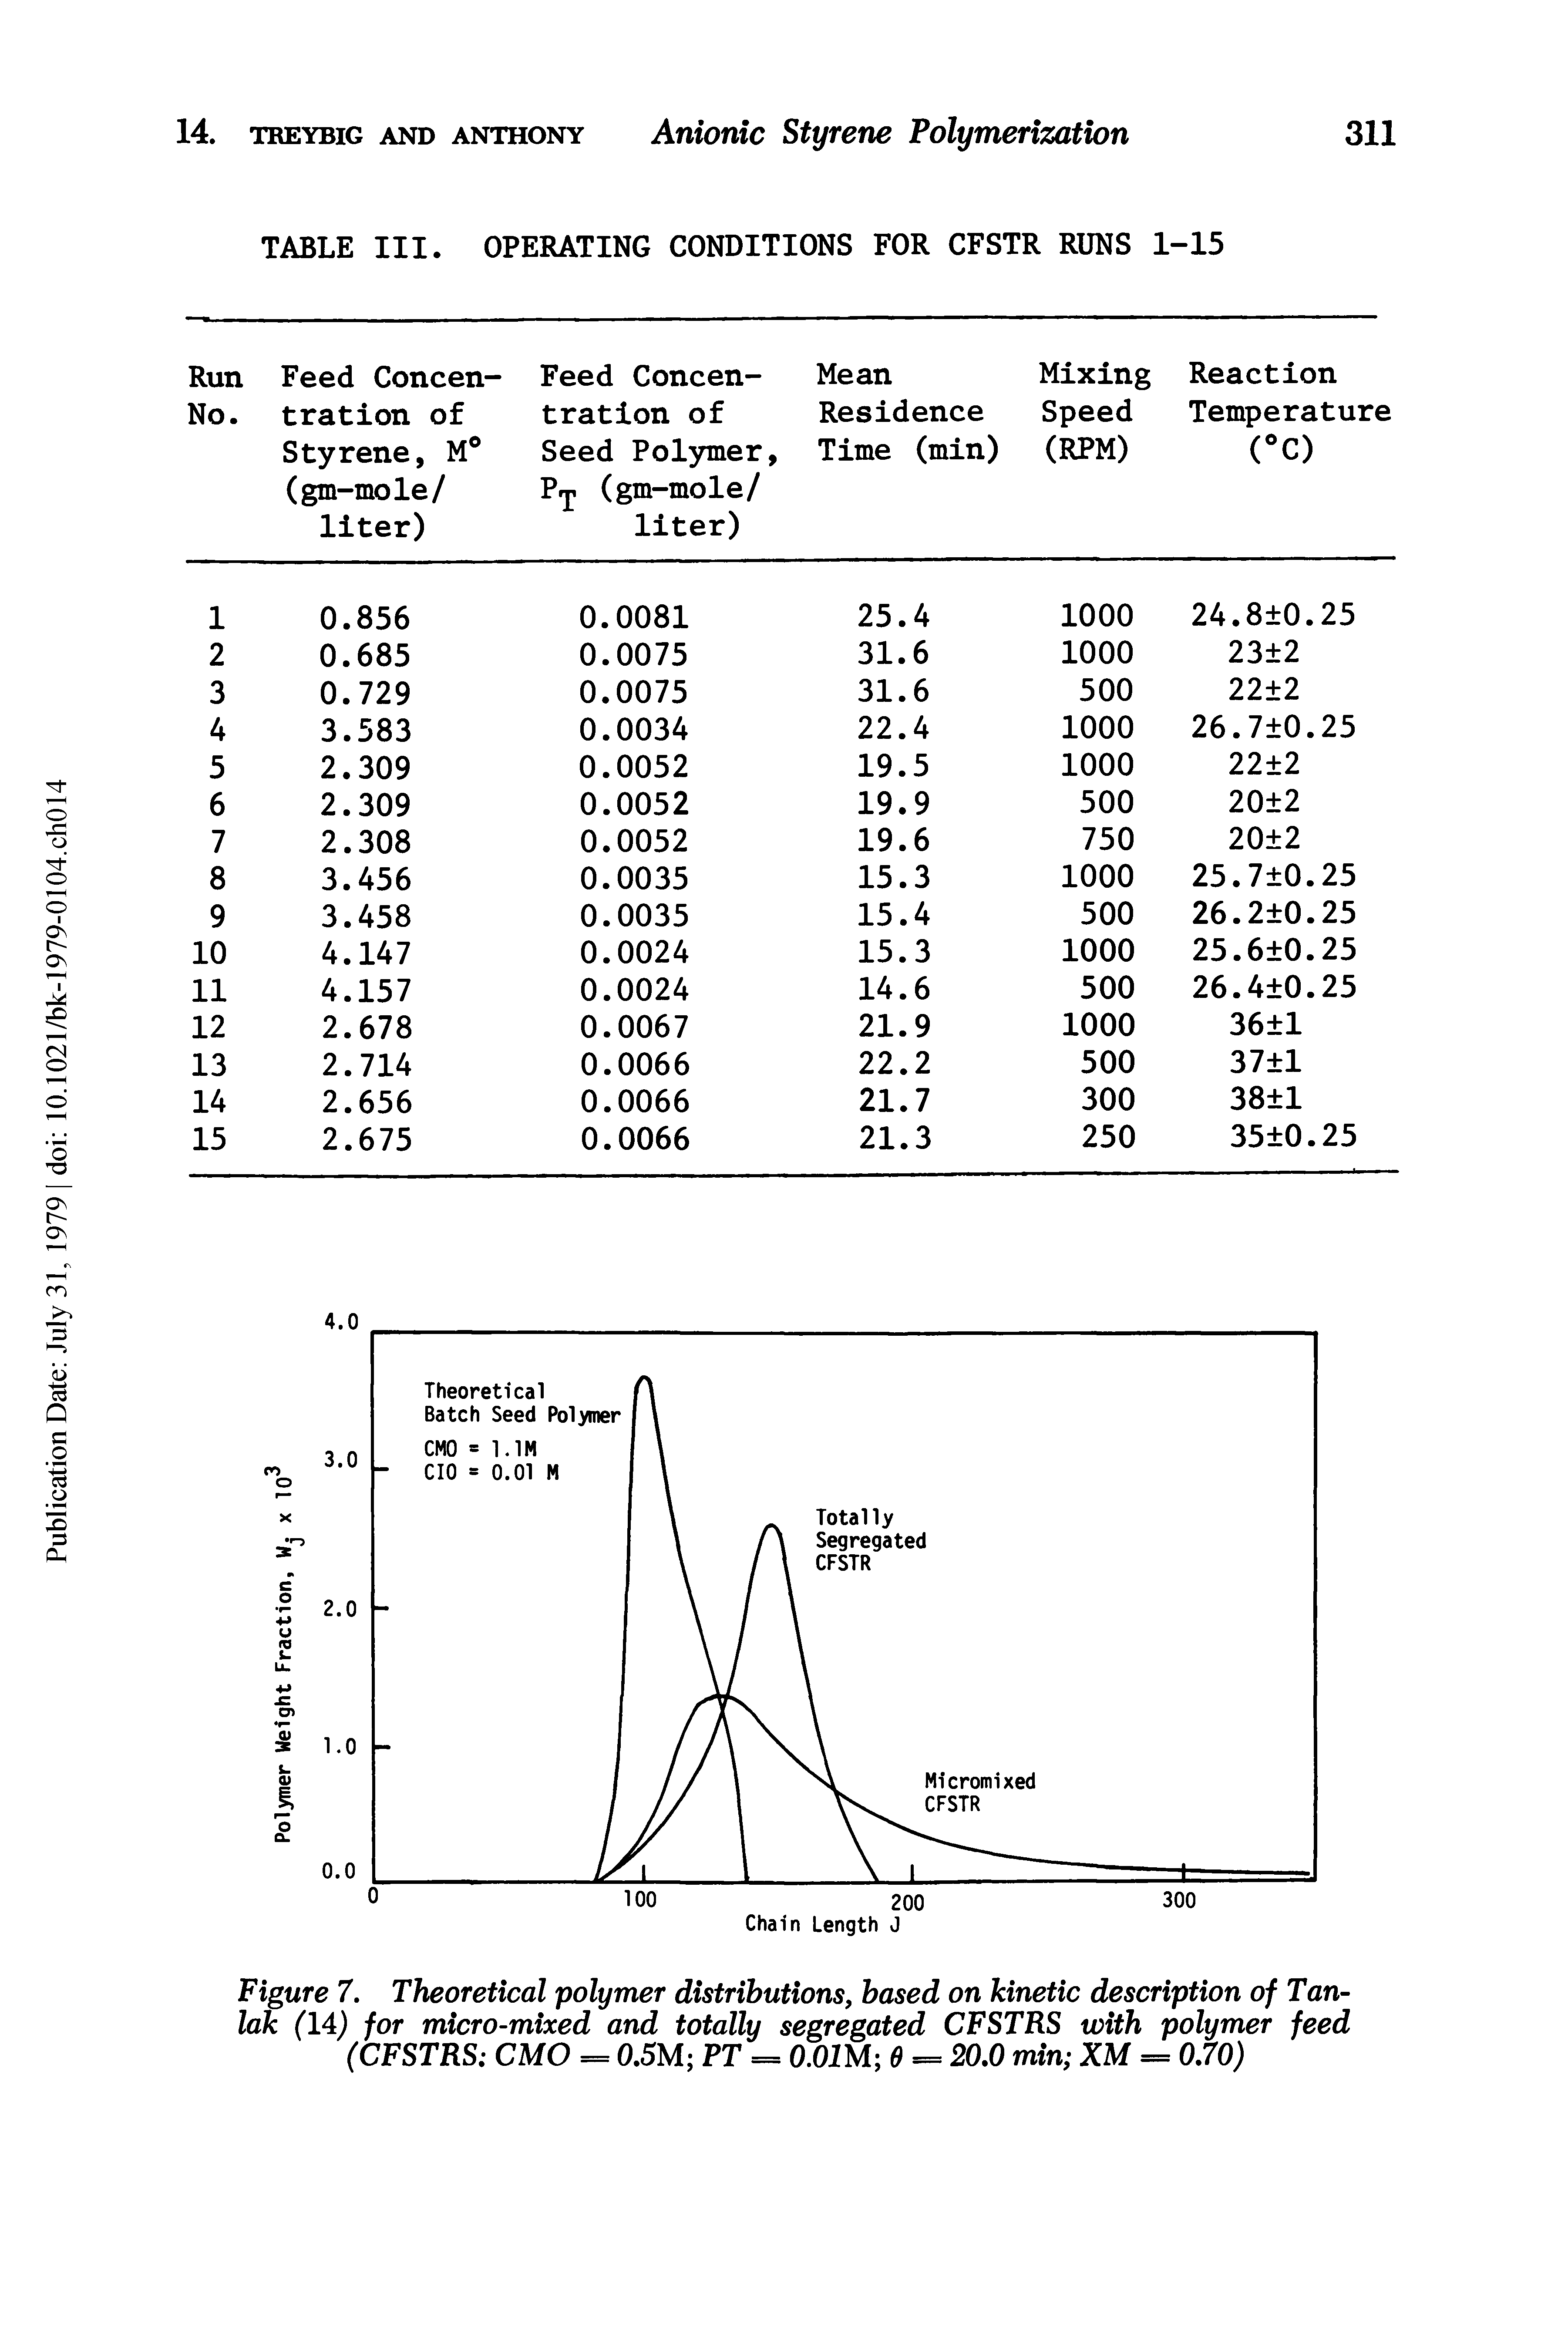 Figure 7. Theoretical polymer distributions, based on kinetic description of Tan-lak (14) for micro-mixed and totally segregated CFSTRS with polymer feed (CFSTRS CMO = 0.5M FT = O.OIM 6 = 20.0 min XM = 0.70)...